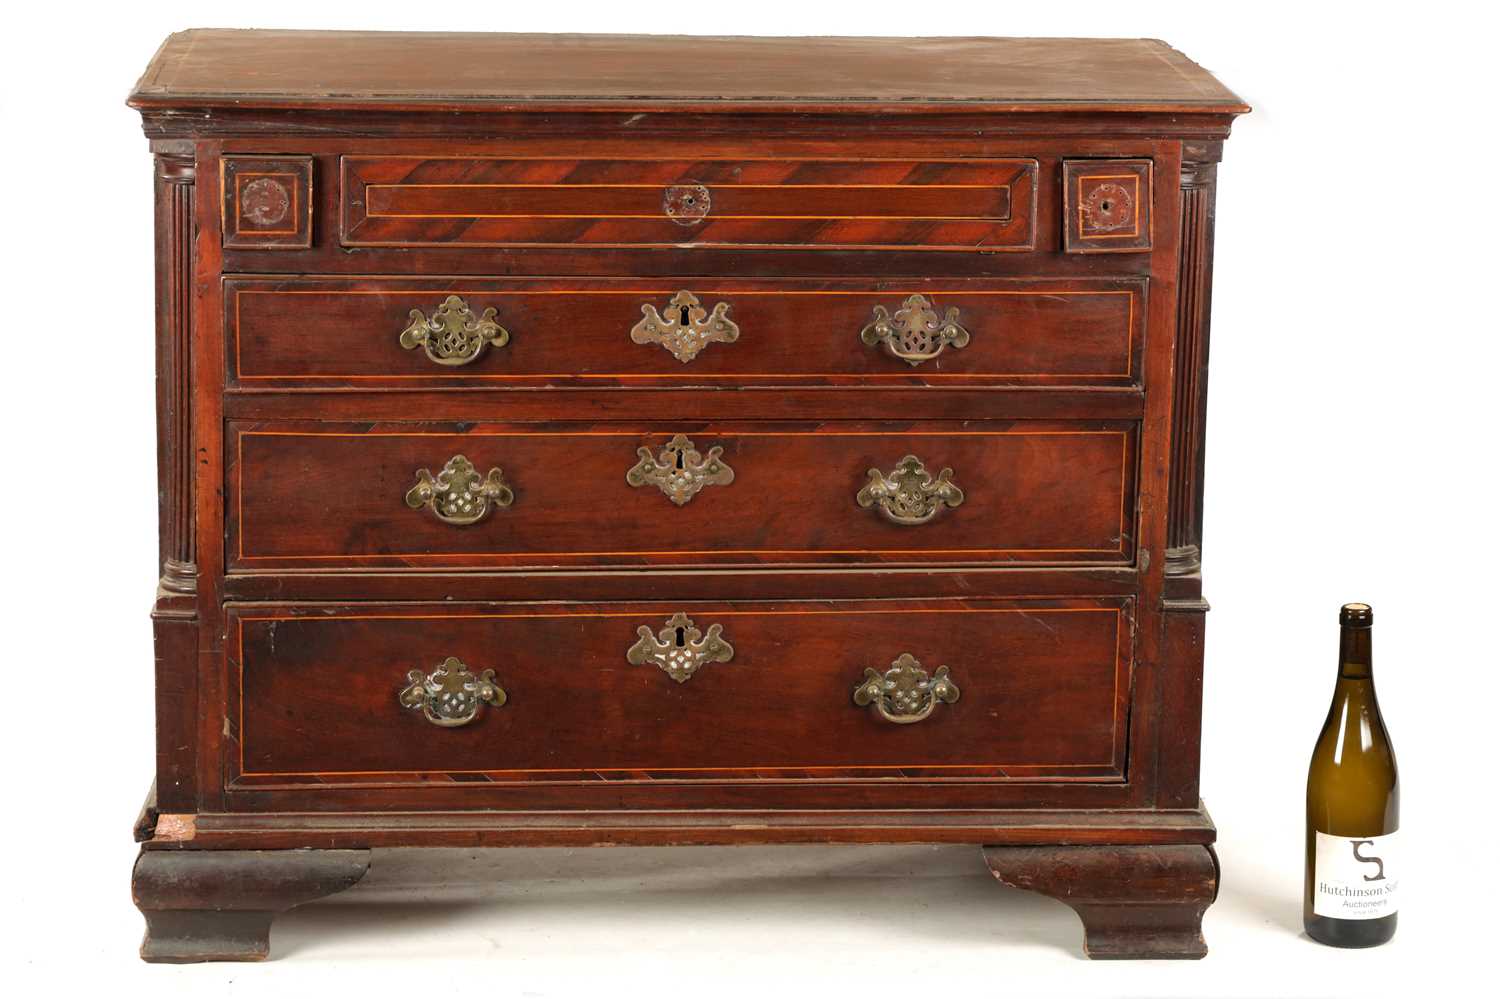 AN 18TH CENTURY FIGURED MAHOGANY CHEST OF DRAWERS - Image 6 of 6